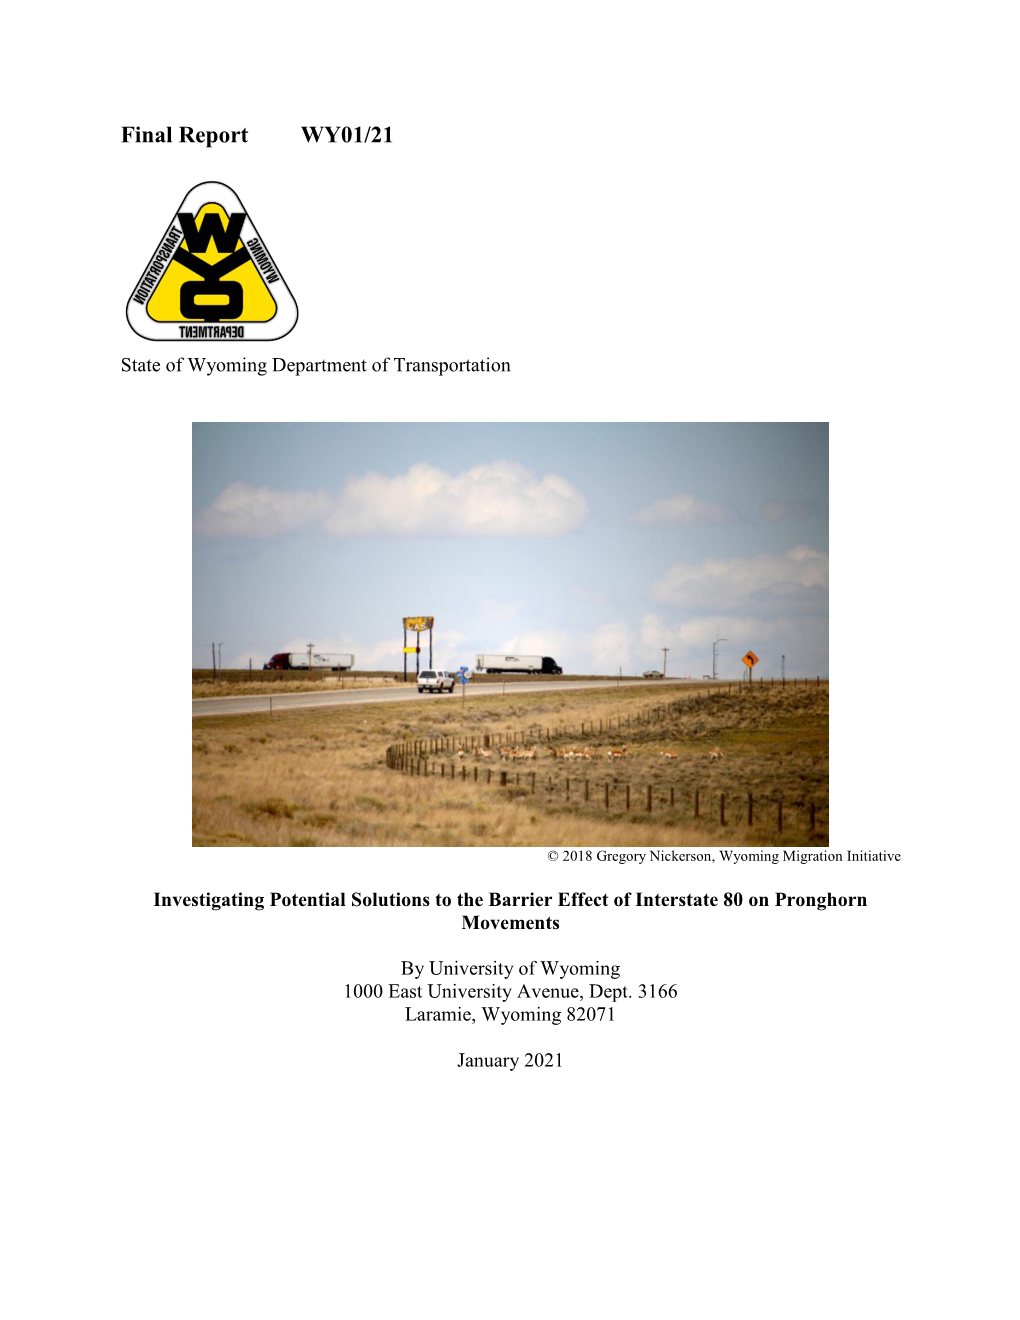 Investigating Potential Solutions to the Barrier Effect of Interstate 80 on Pronghorn Movements